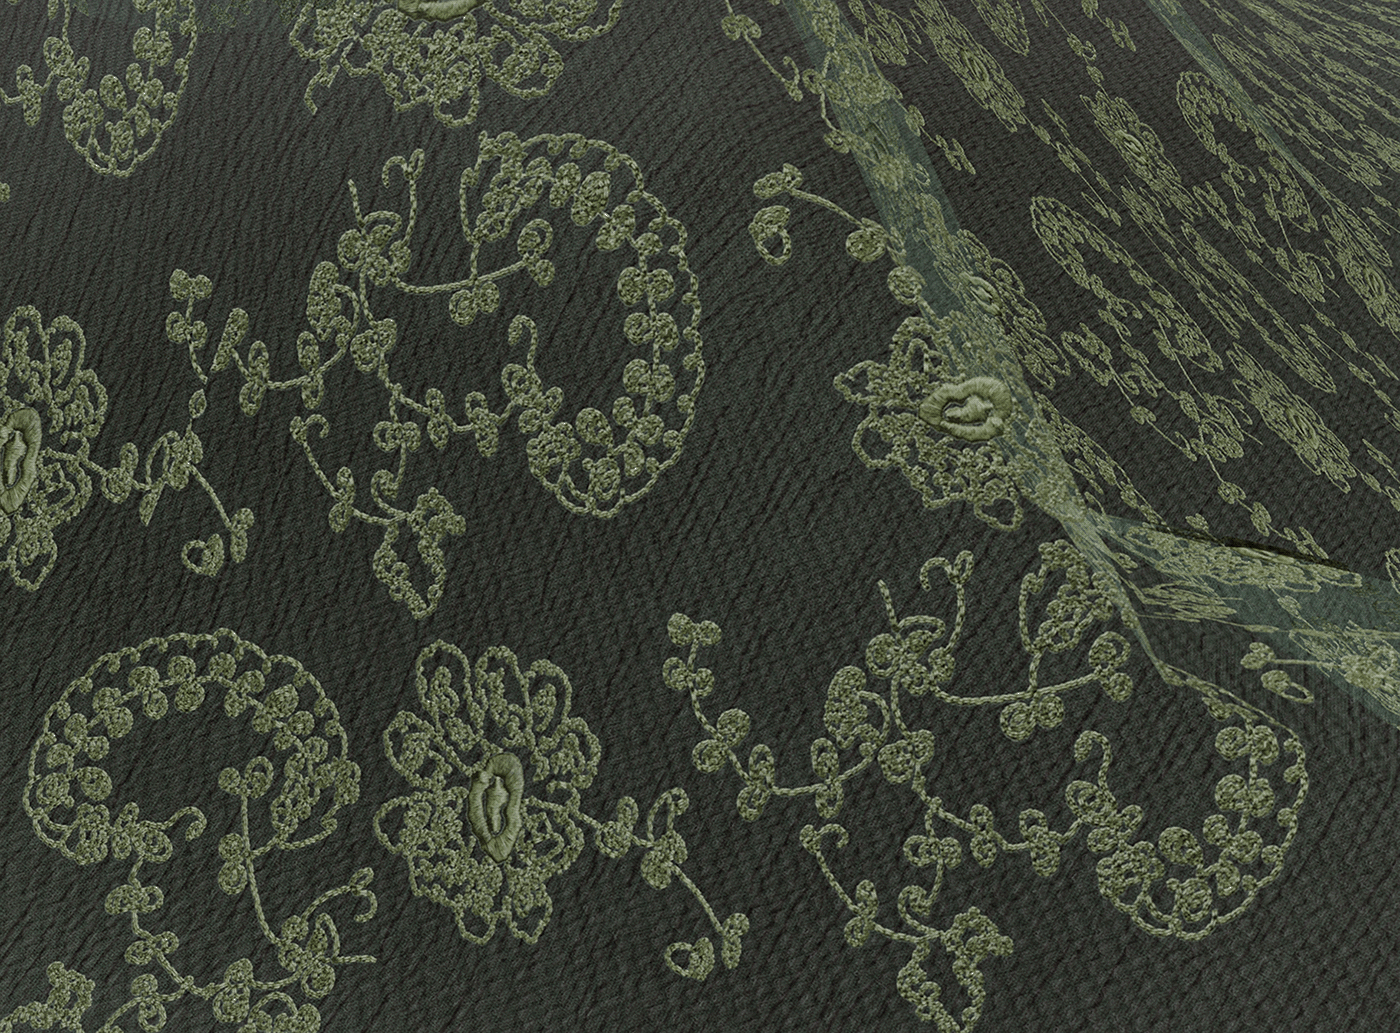 Embroidery Fashion  material Textiles texture